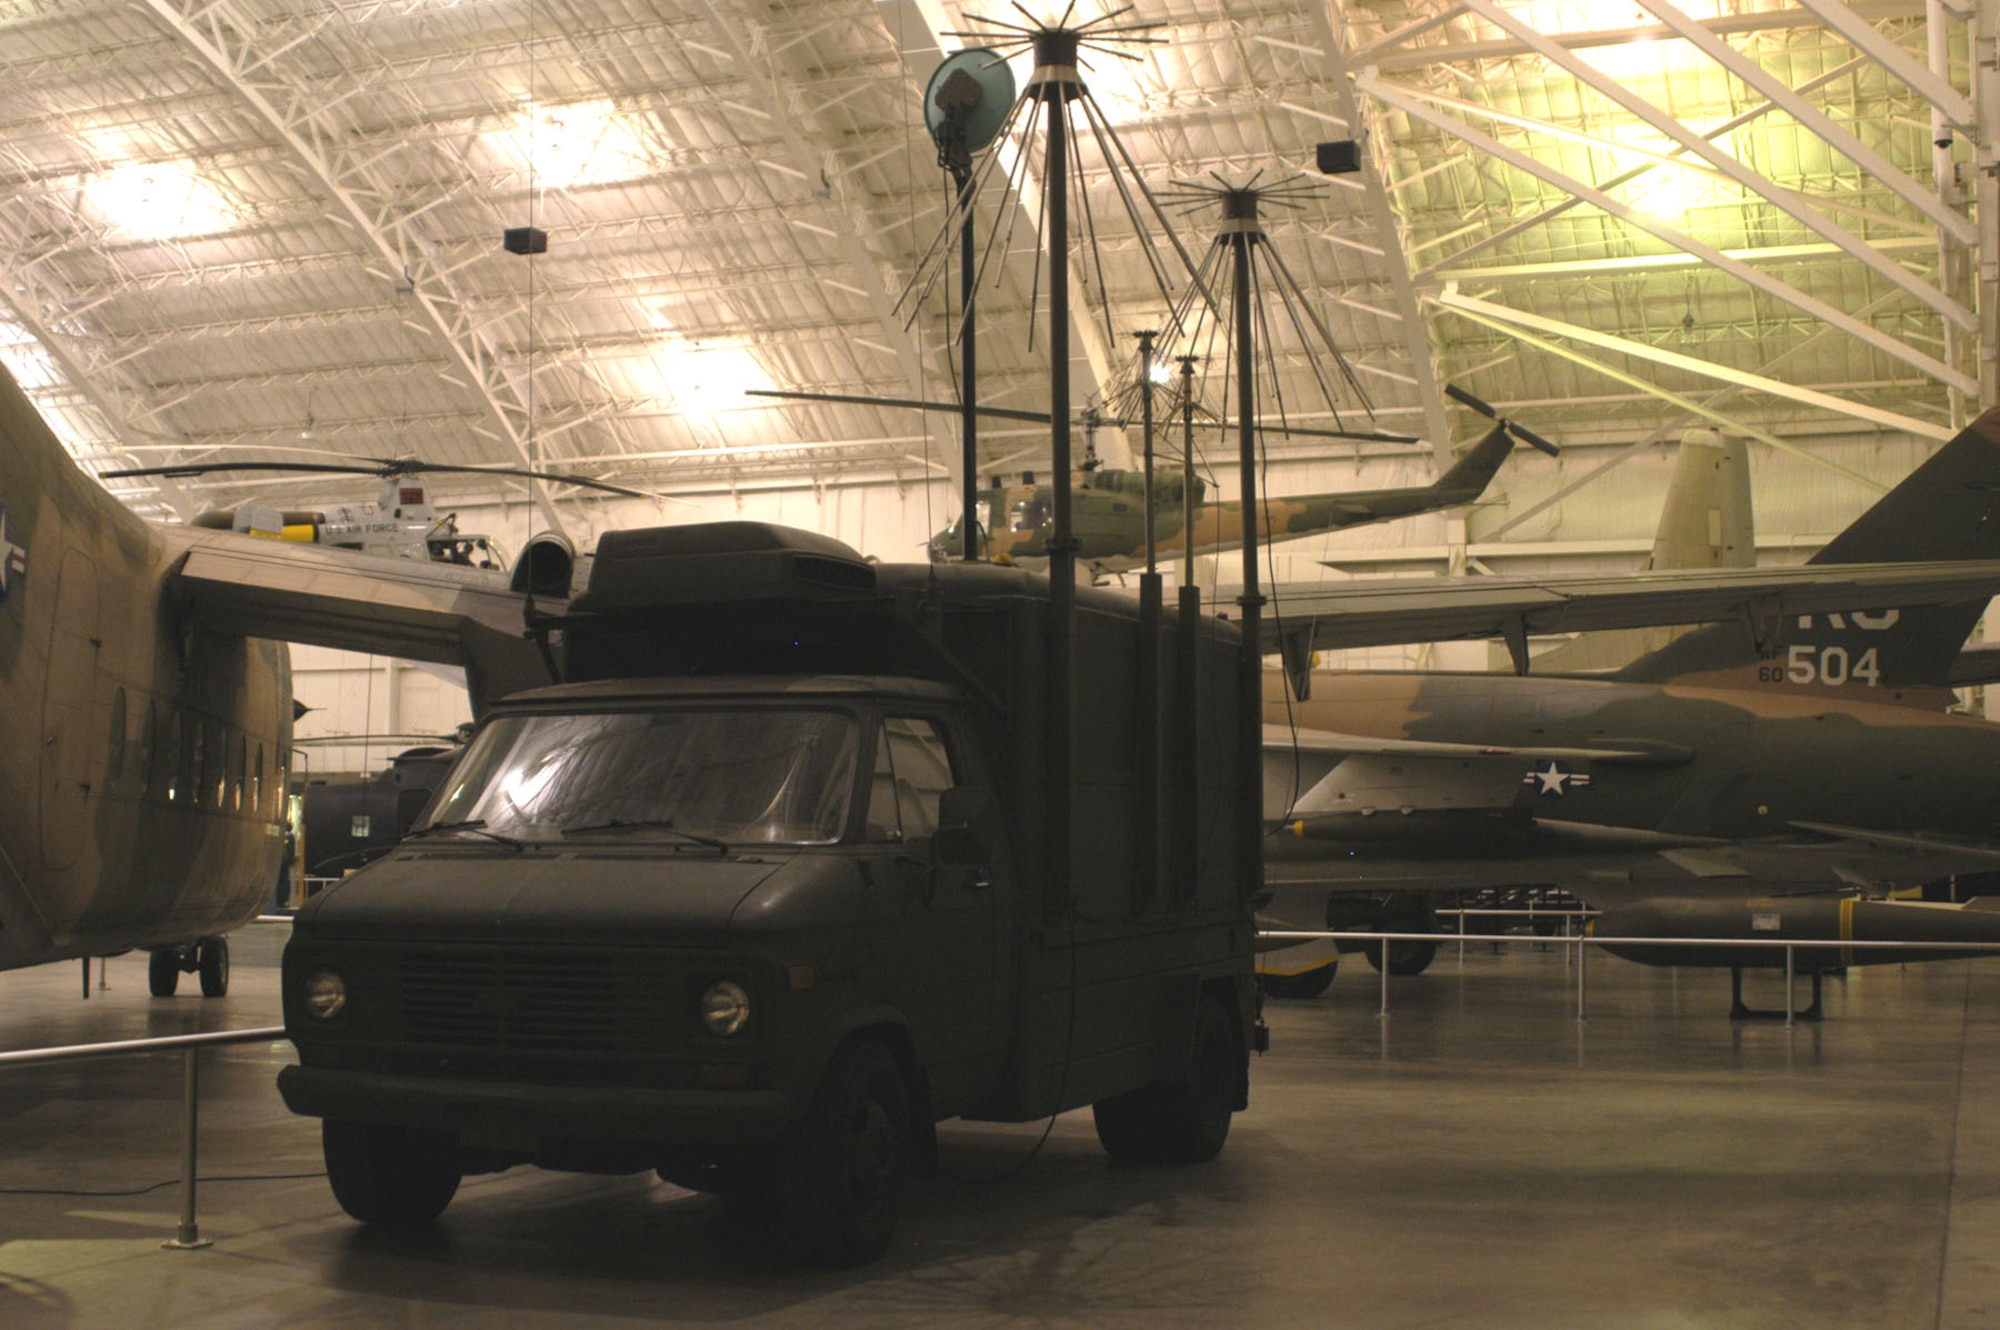 DAYTON, Ohio -- AN/MSR-1 ("Misery") Communications Intercept Van on display in the Southeast Asia War Gallery at the National Museum of the United States Air Force. (U.S. Air Force photo)